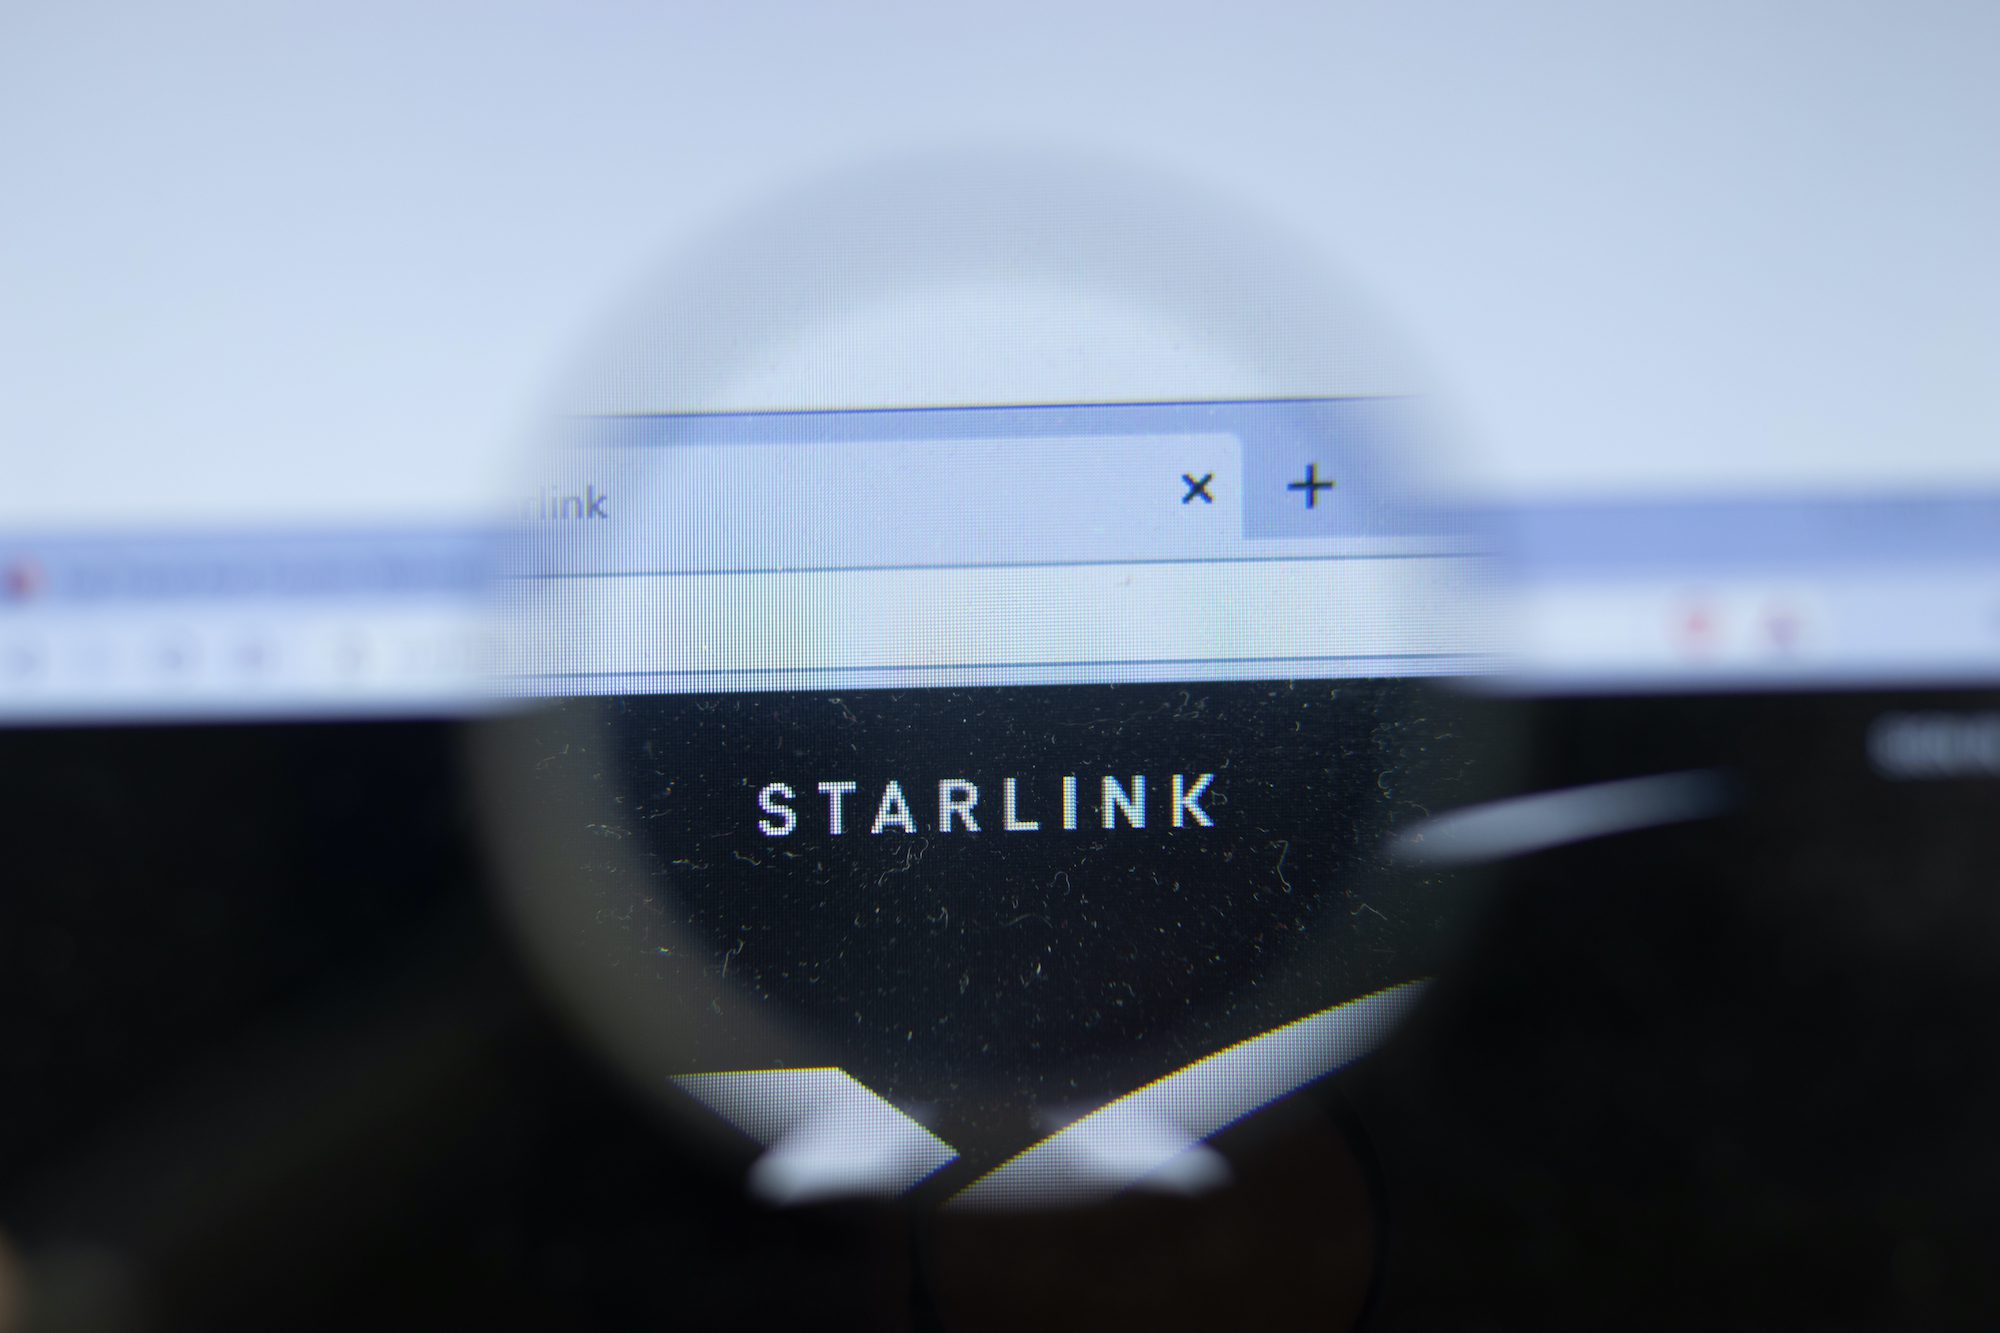 Anglo-Eastern Installs Starlink Internet Service on First of More Than 200 Managed Ships